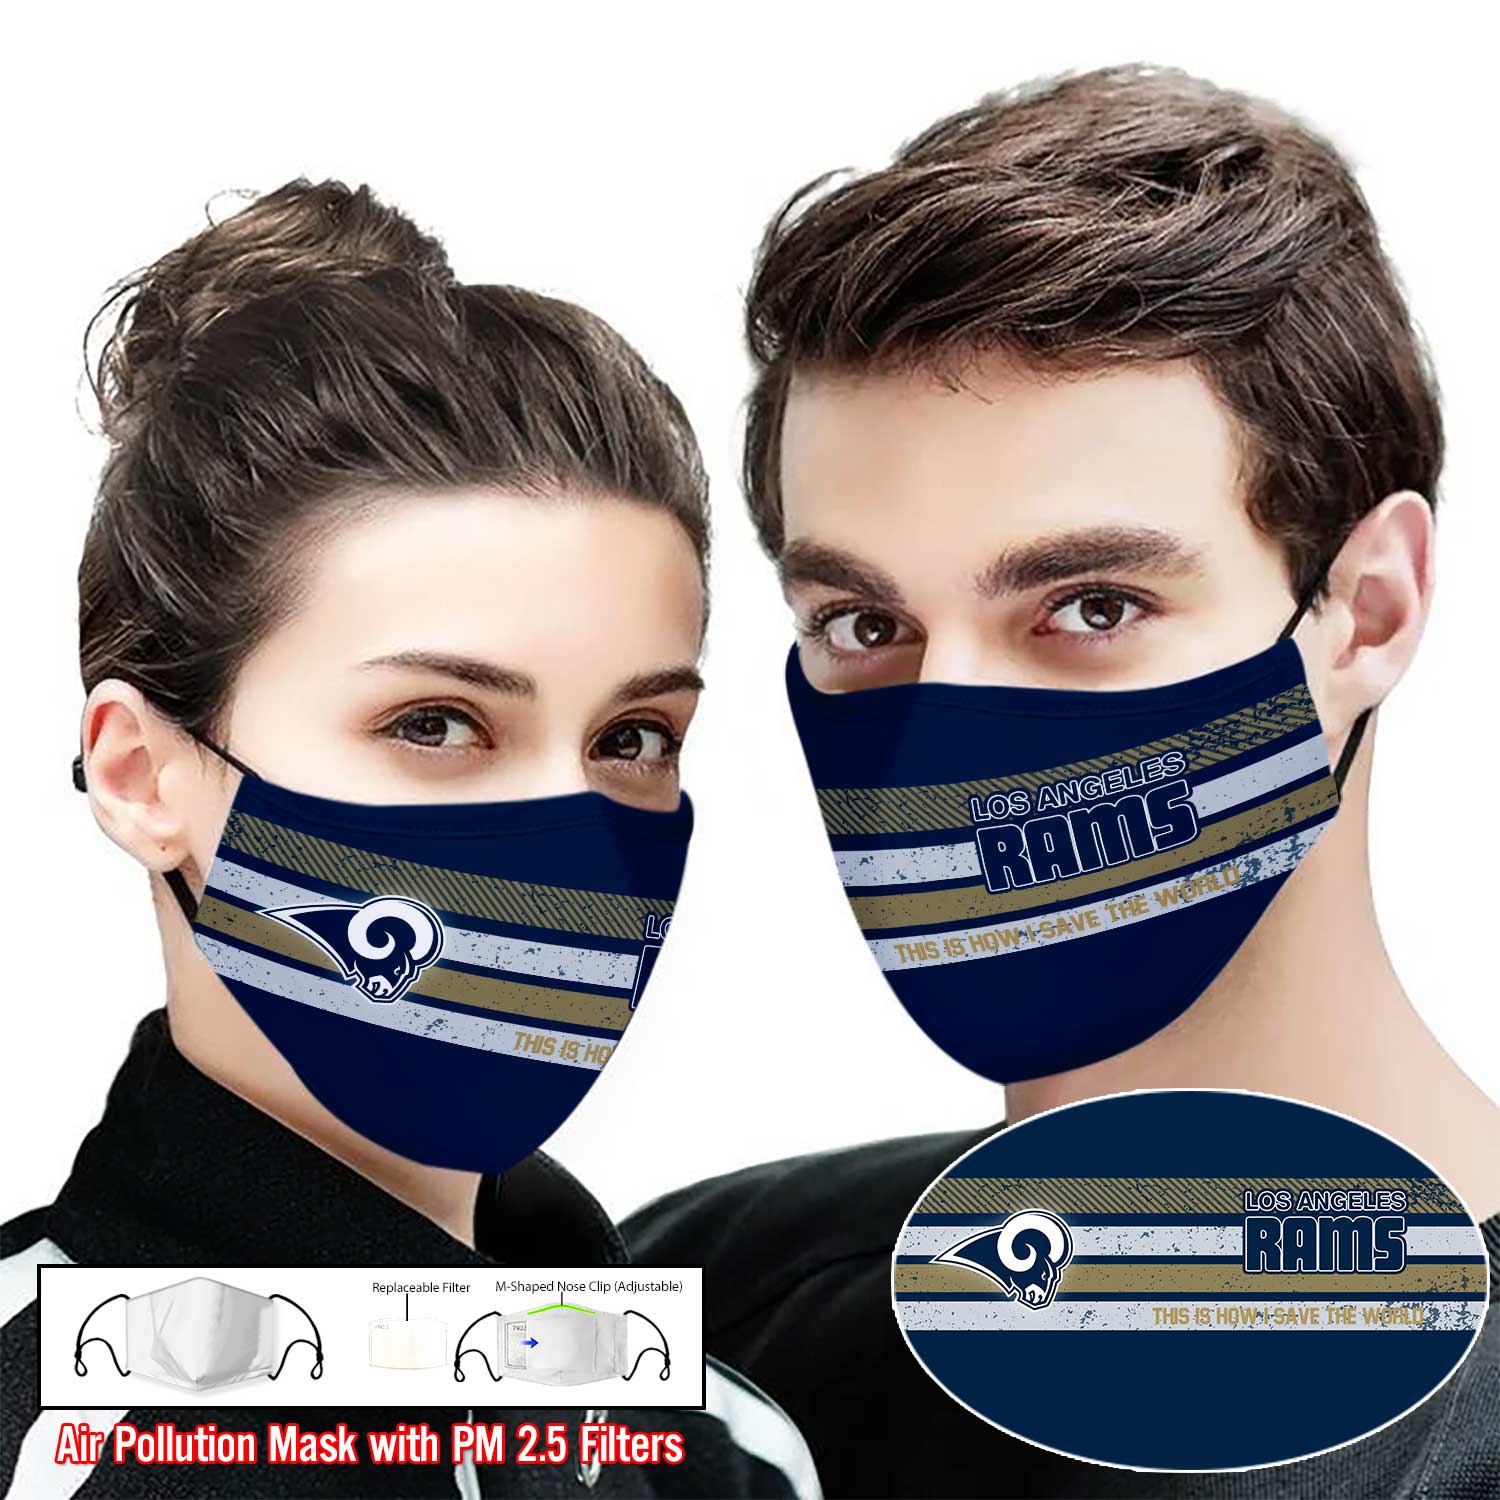 Los angeles rams this is how i save the world full printing face mask